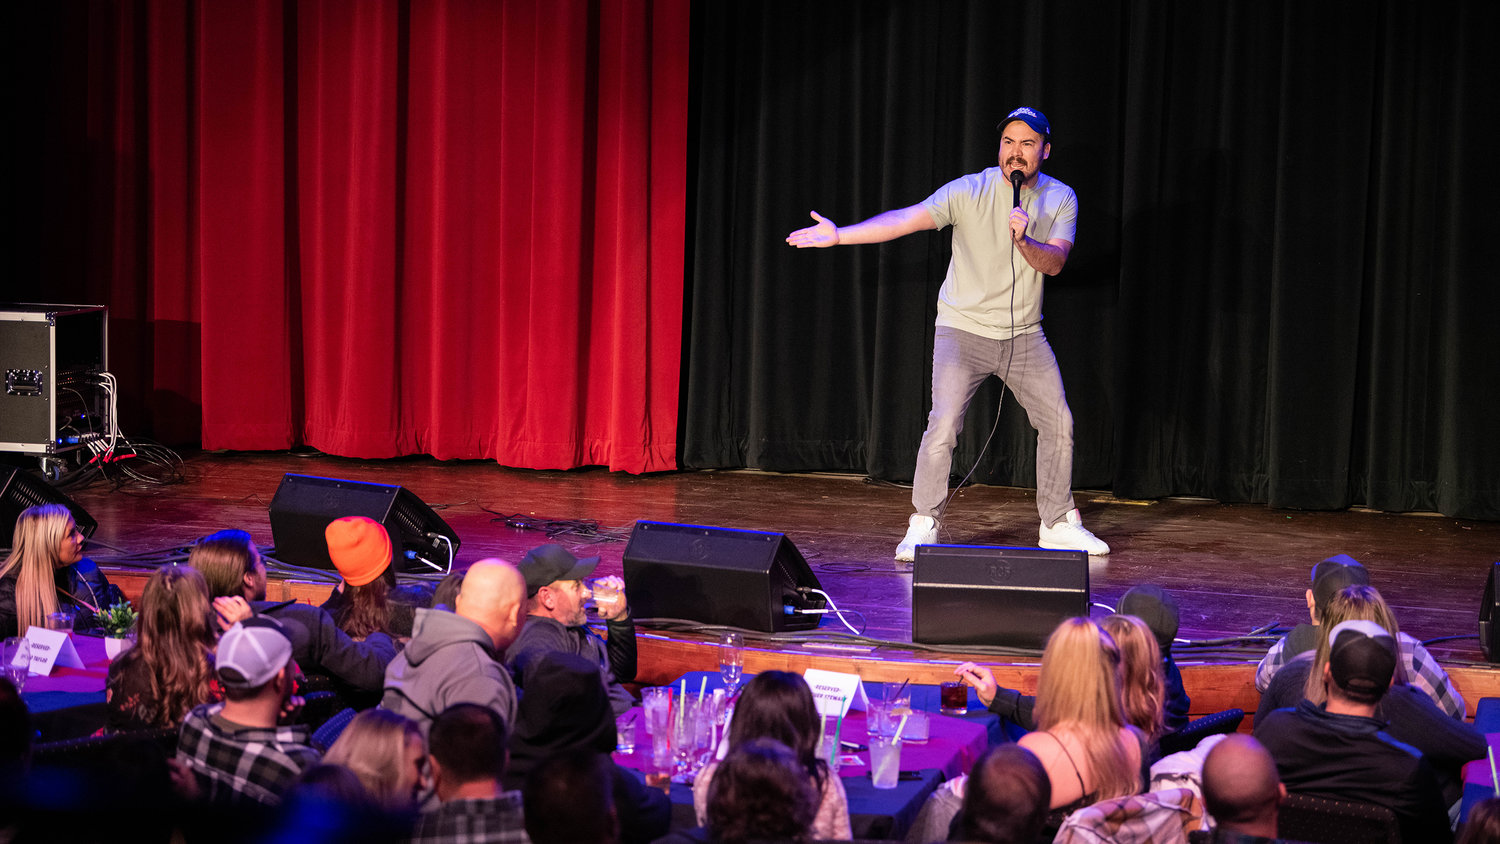 Ralph Guerra gestures toward the crowd while performing a sold out comedy show Friday night at the McFiler’s Chehalis Theater.